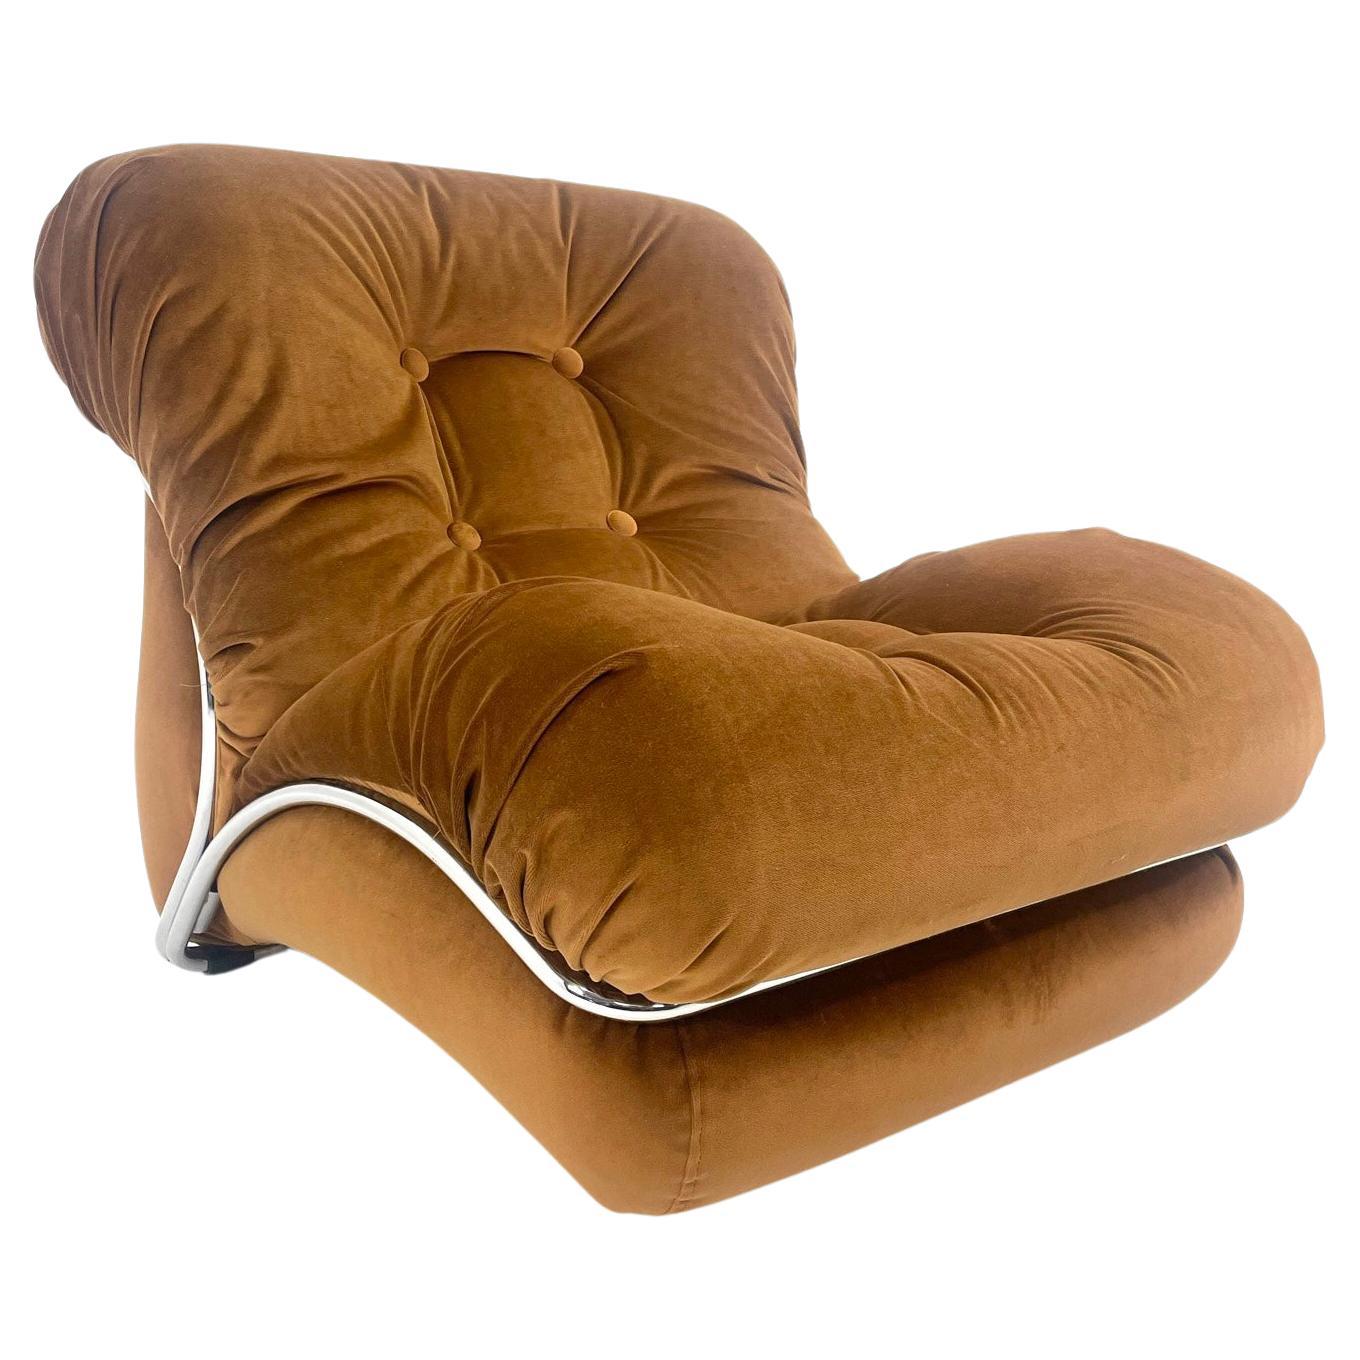 I.P.E., lounge chair, model 'Corolla', velvet, chrome-plated steel, Italy, 1970s

A striking design that will add a vibrant softness to your room.  Lower yourself into a cloud of comfort.  A wing-like structure that resembles a butterfly is used for